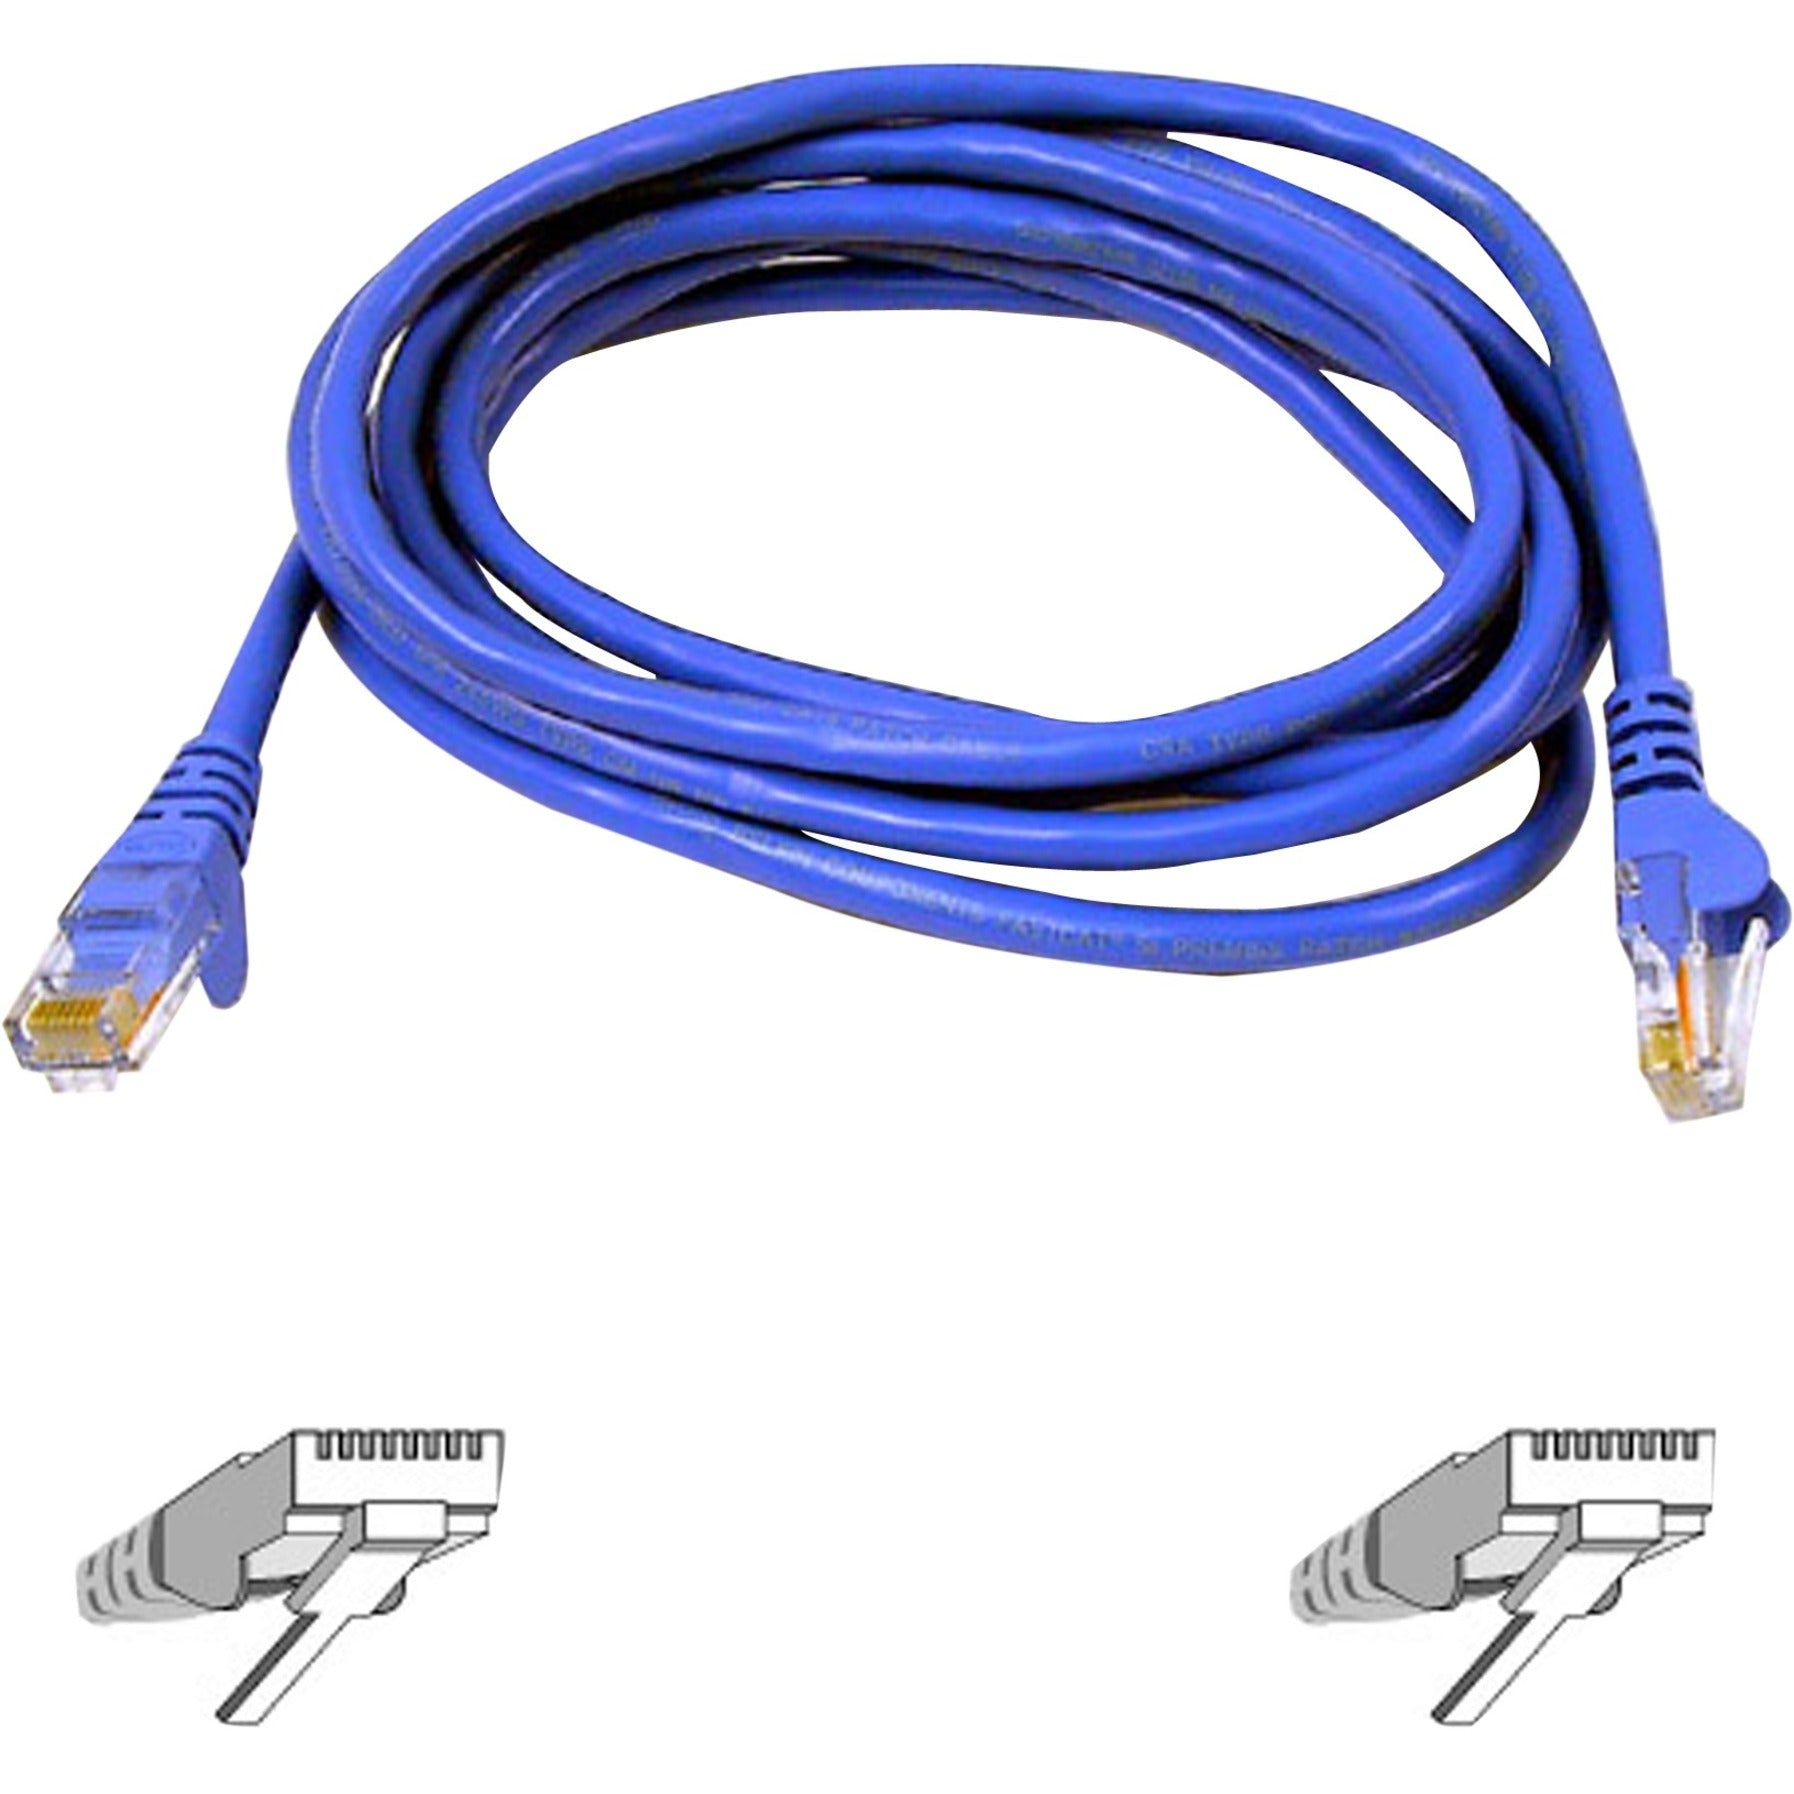 Belkin A3L980-20-BLU Cat.6 UTP Patch Network Cable, 20 ft, Stranded, Copper, Gold Plated